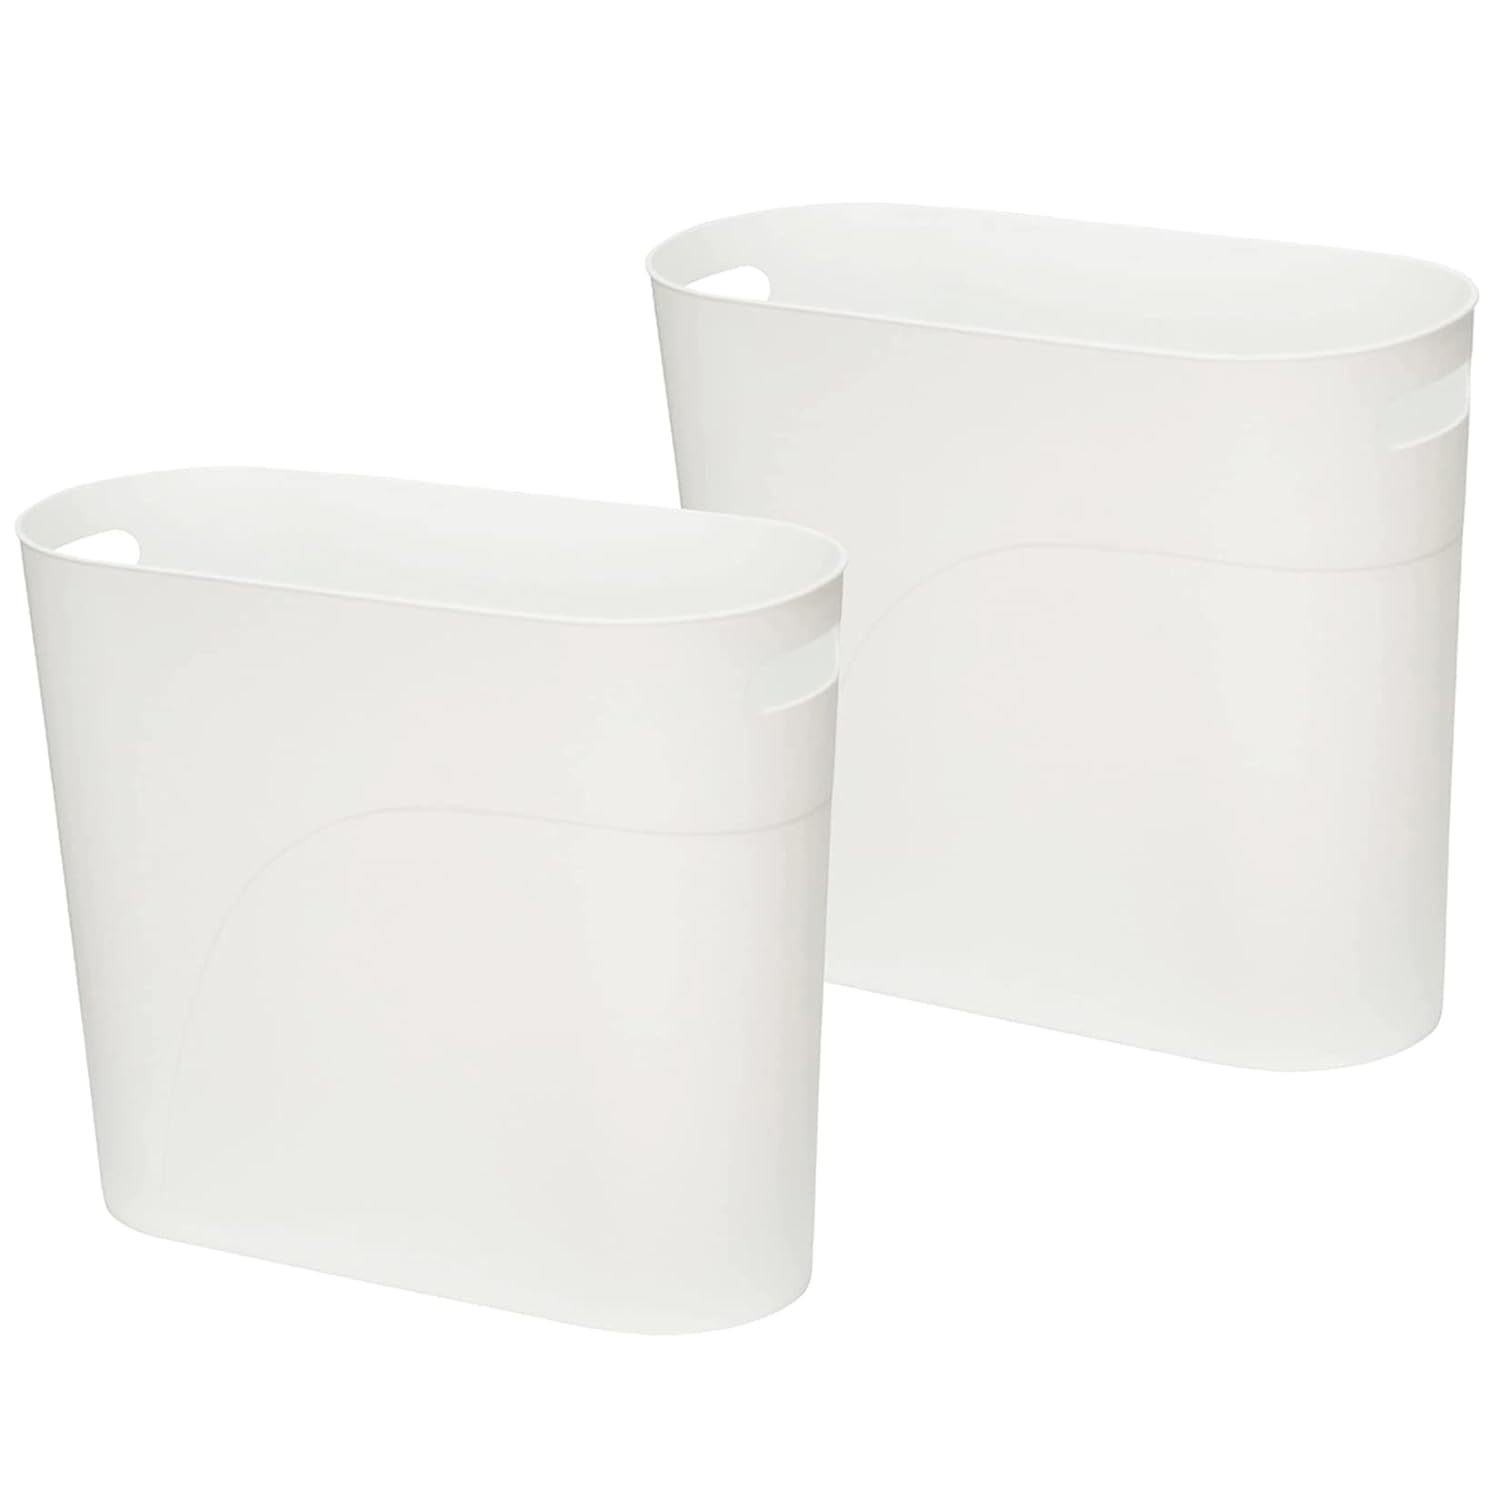 Primary image for Small Trash Can Plastic Bathroom Wastebasket 3.2 Gallon Slim Garbage Container B